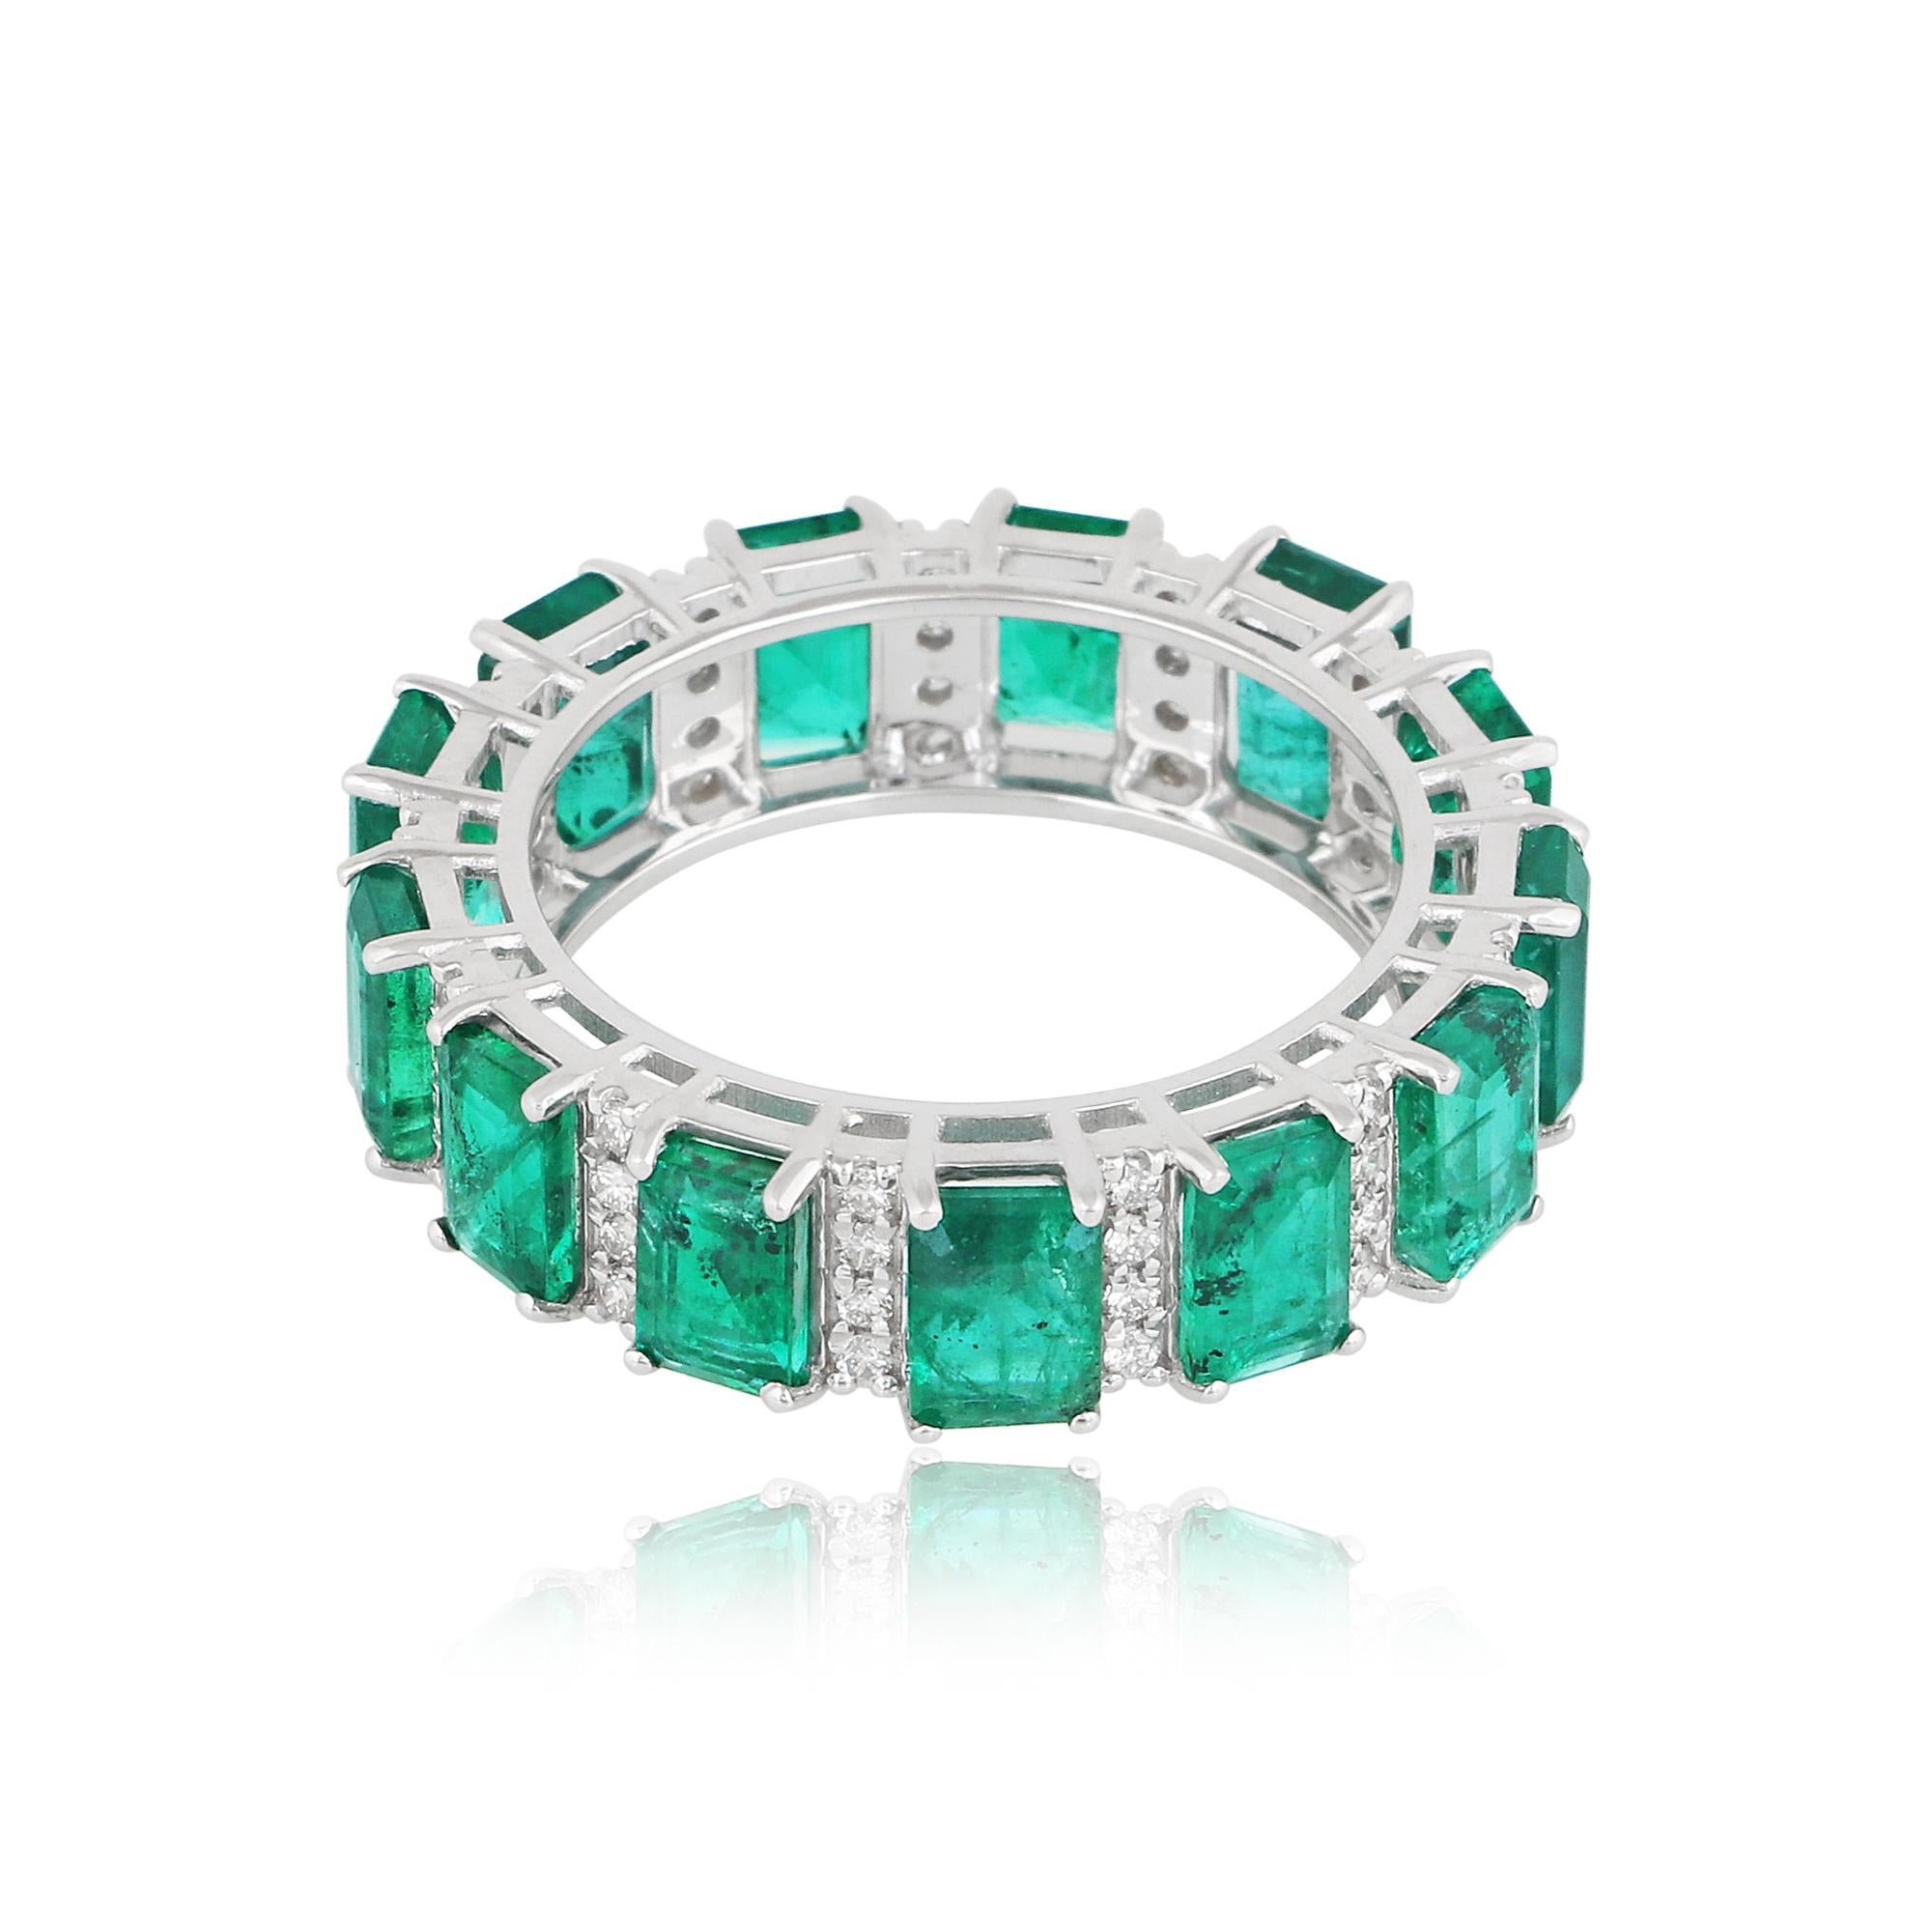 For Sale:  Natural Emerald Gemstone Band Ring SI Clarity HI Color Diamond 18k White Gold 3